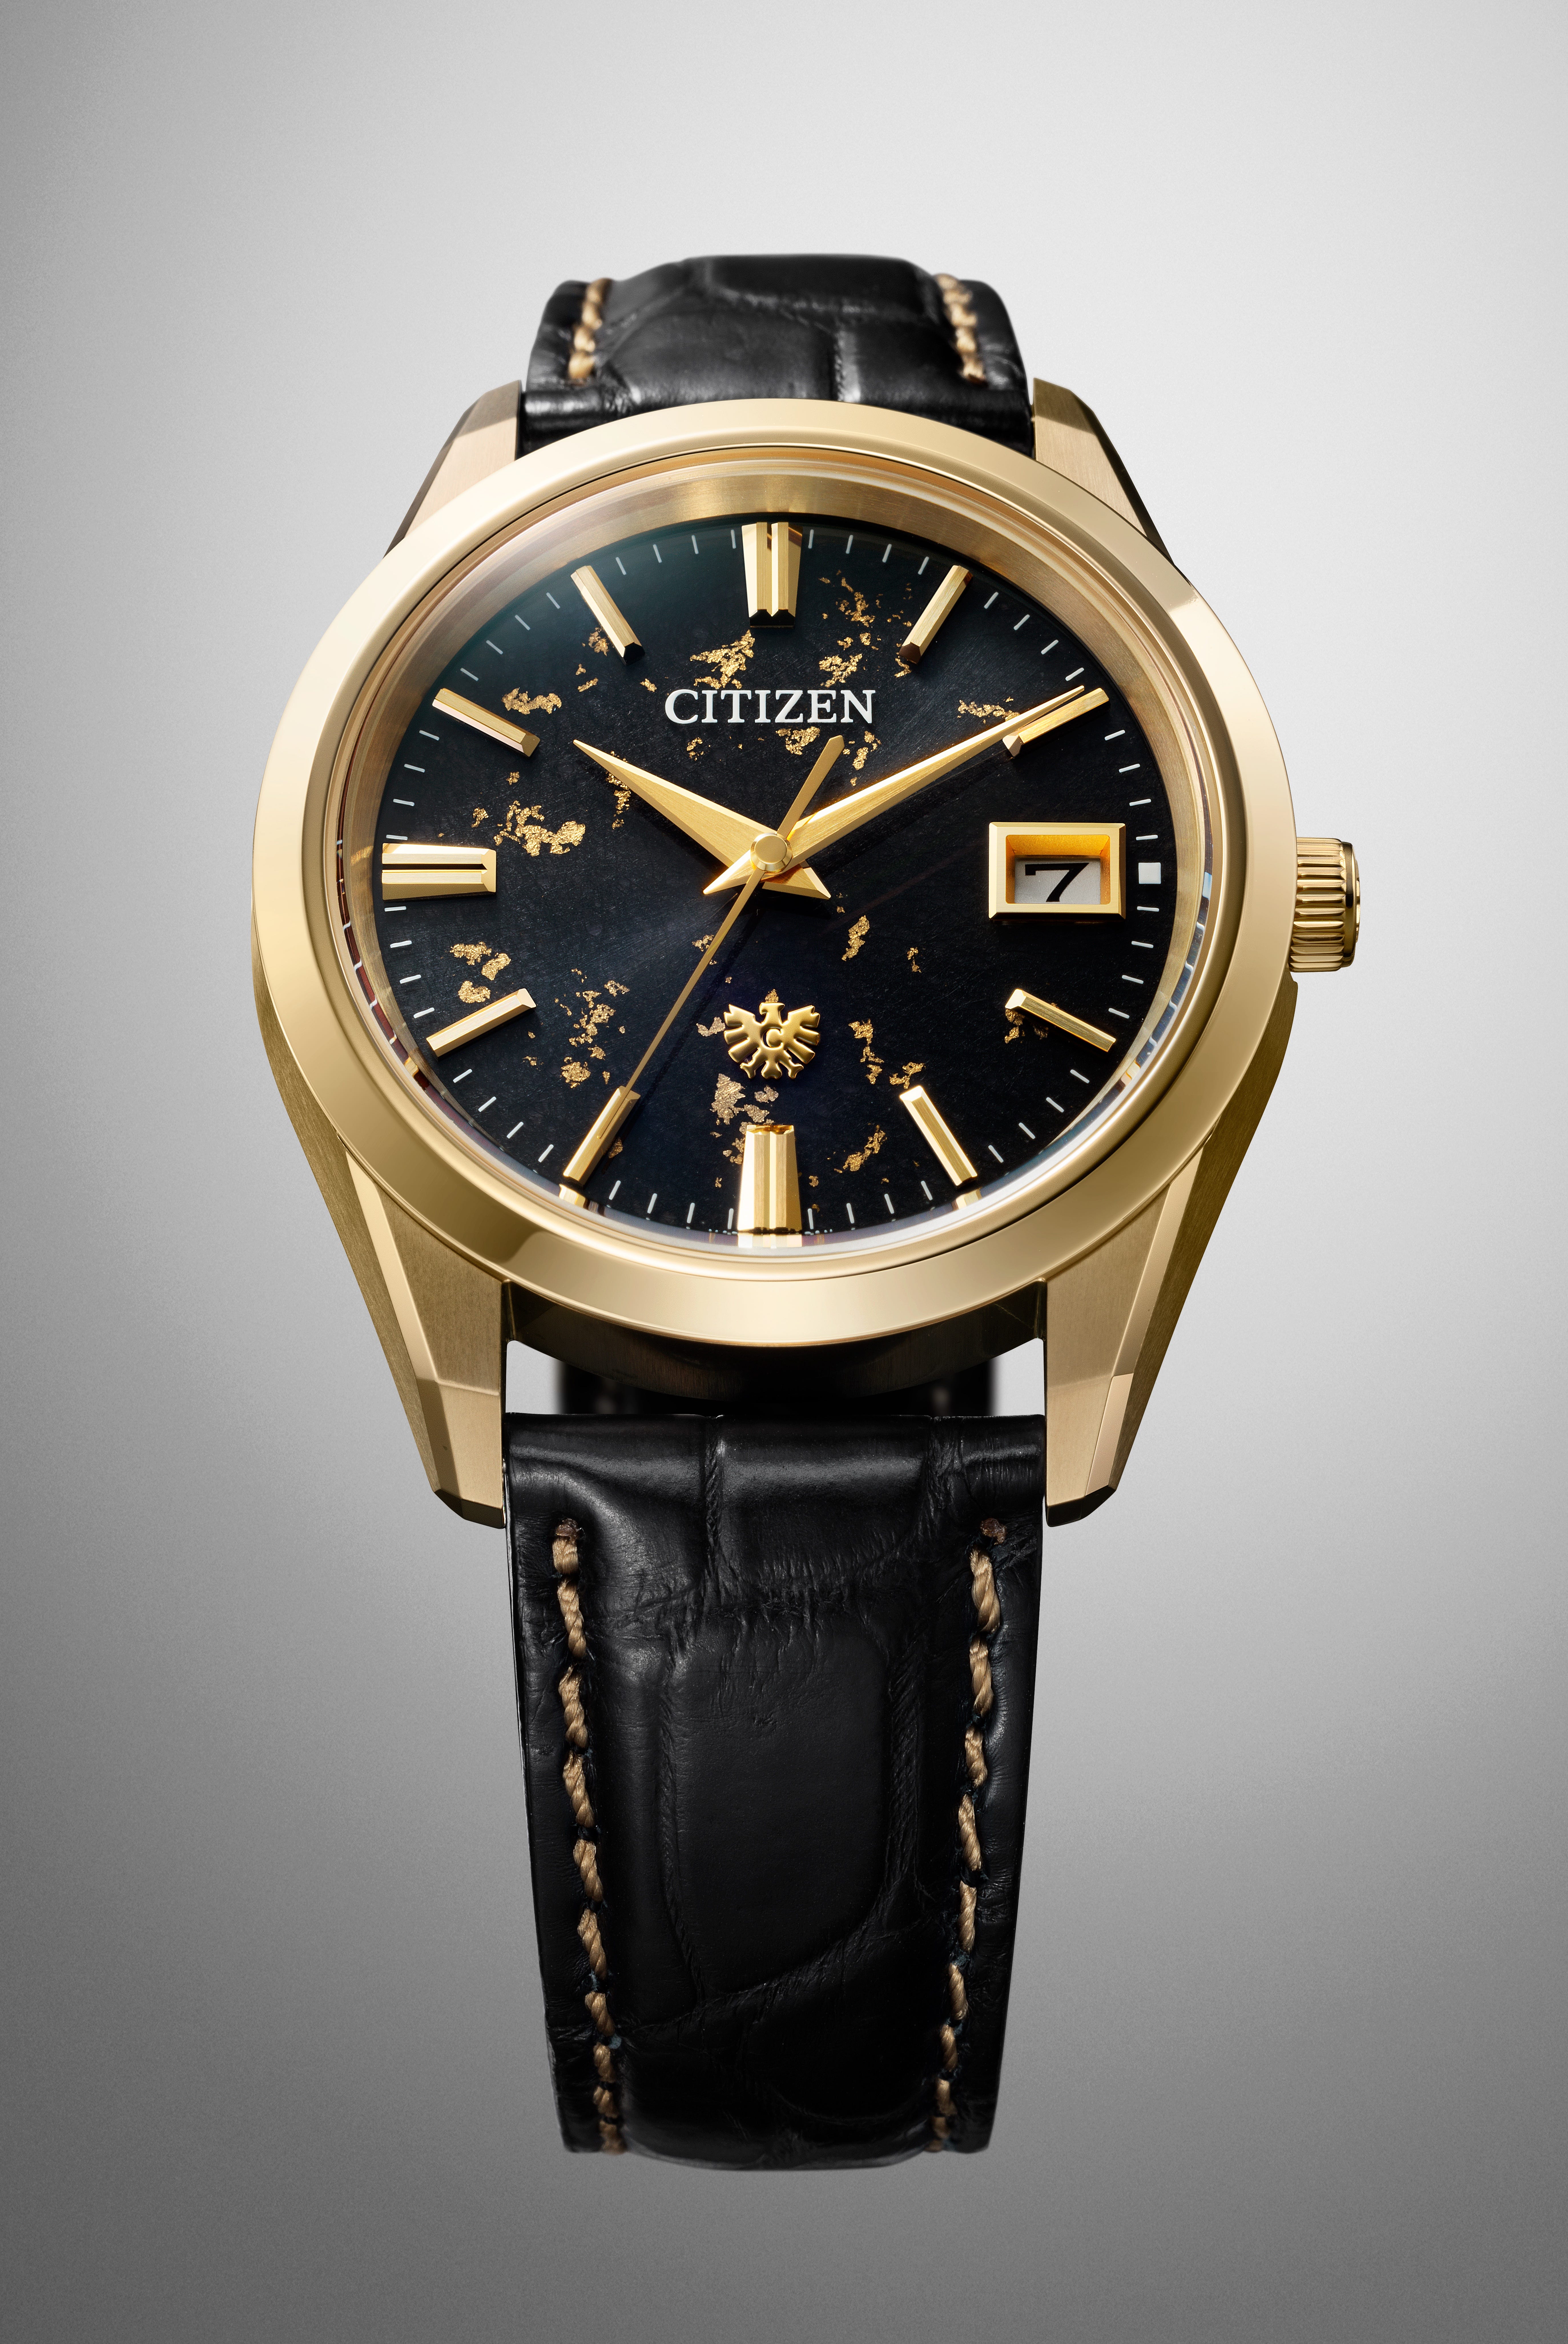 Introducing 'The Citizen' With Washi Paper Dial